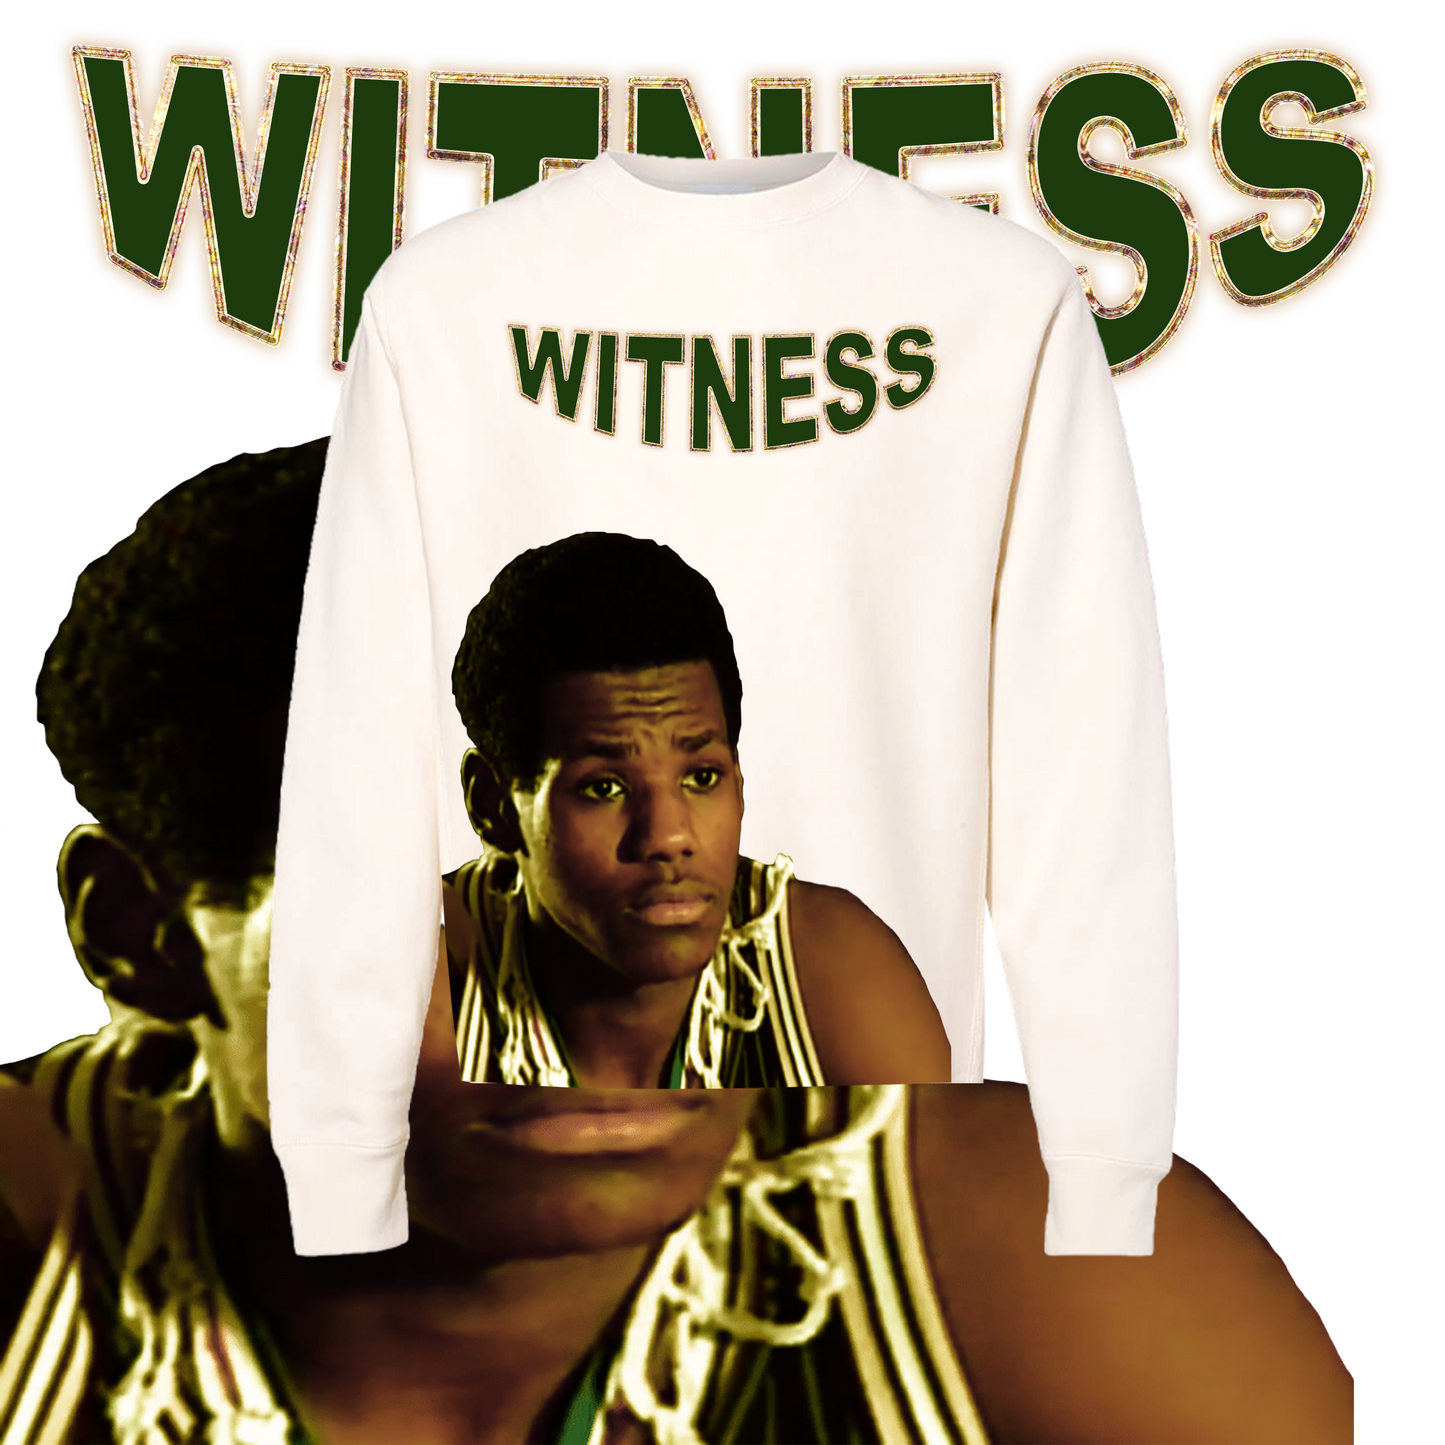 LEAK "WITNESS" YOUNG GOAT CROPPED AND DISTRESSED SWEATSHIRT